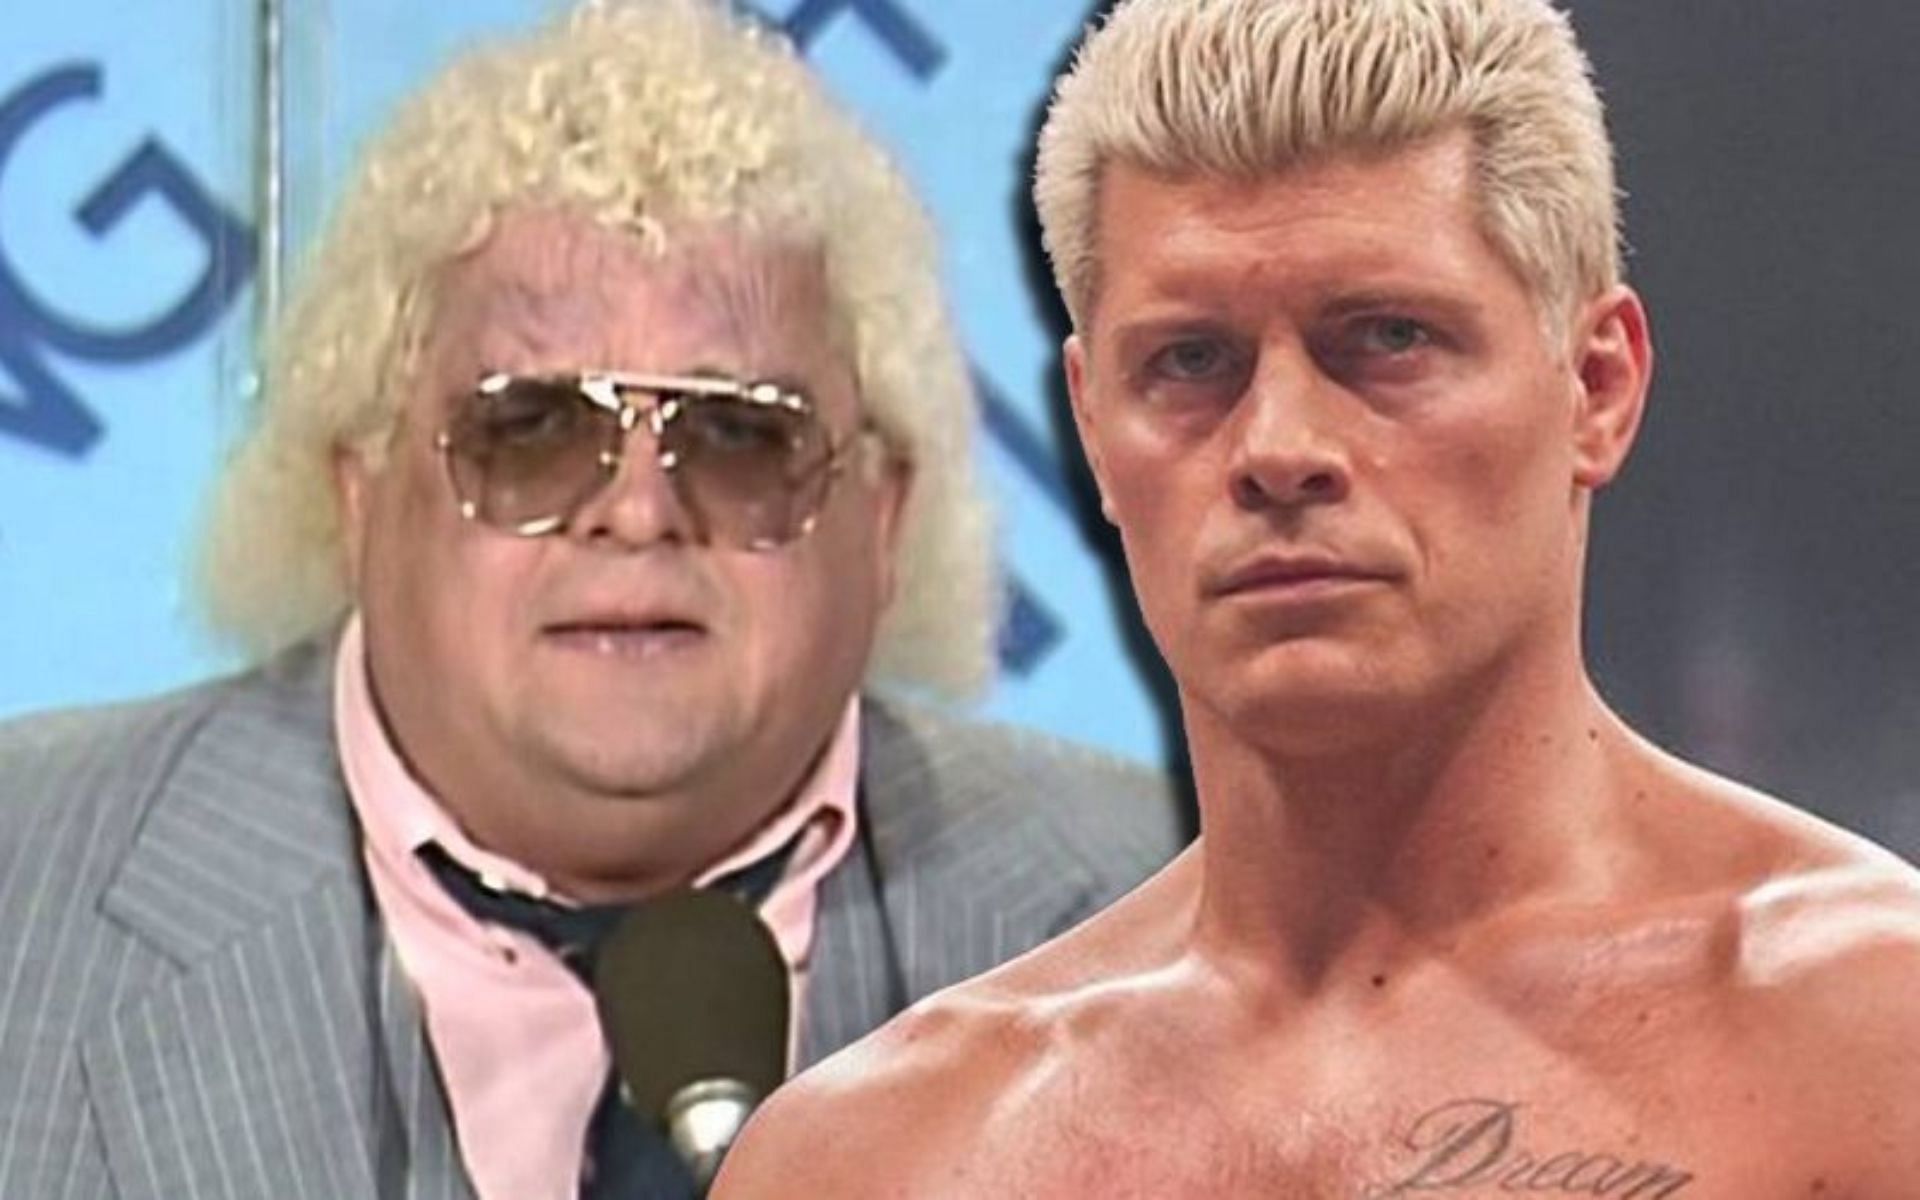 Cody has paid tribute to Dusty Rhodes since returning to WWE.